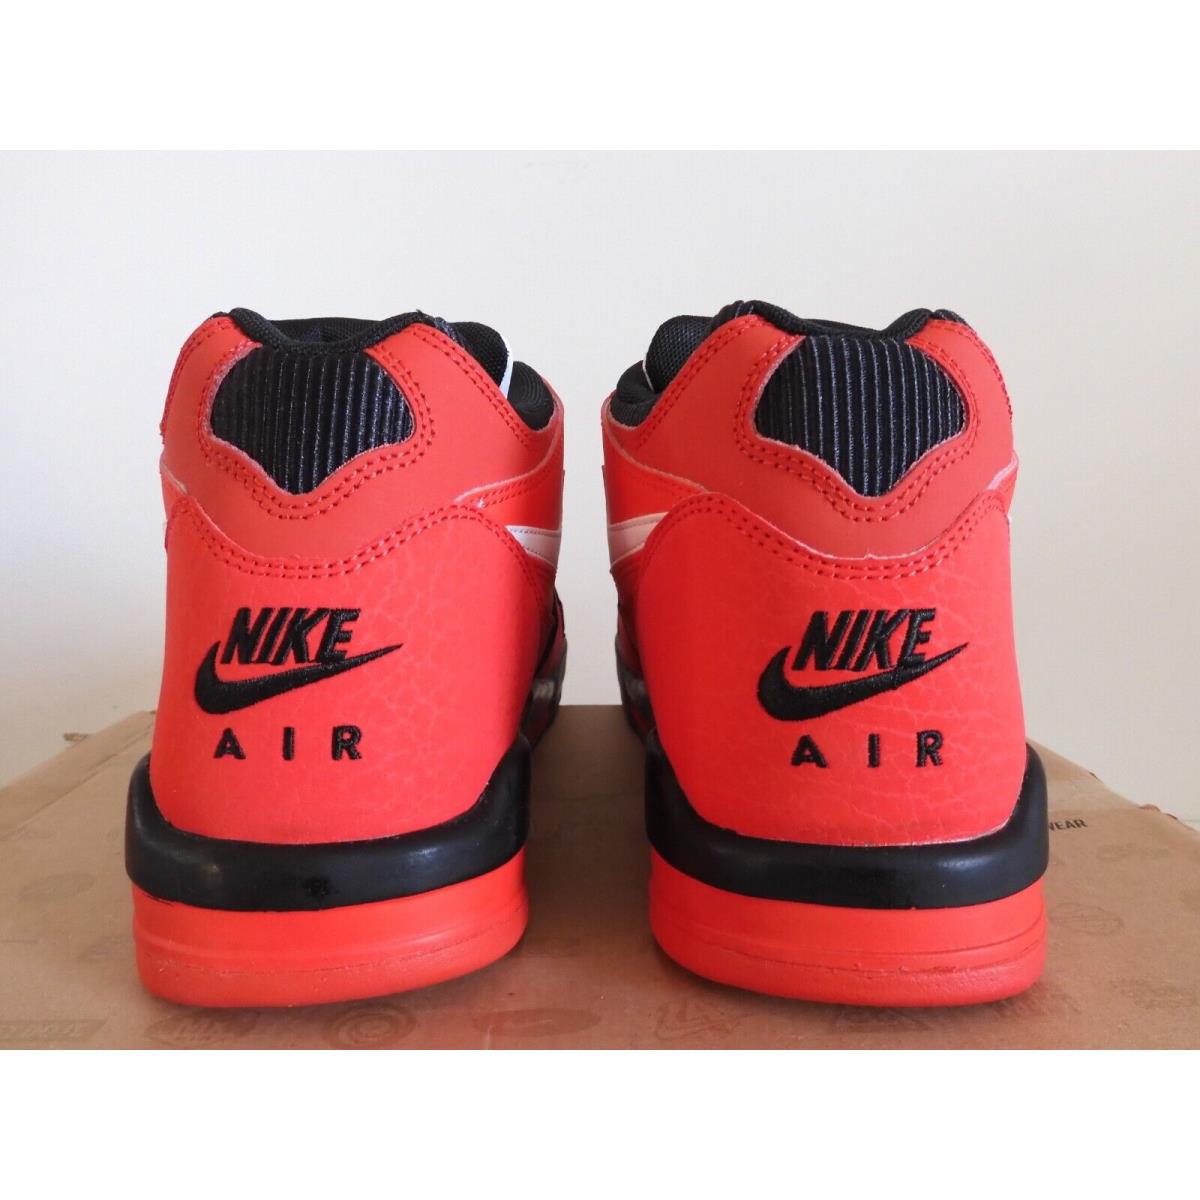 Nike shoes Air Flight - Red 2